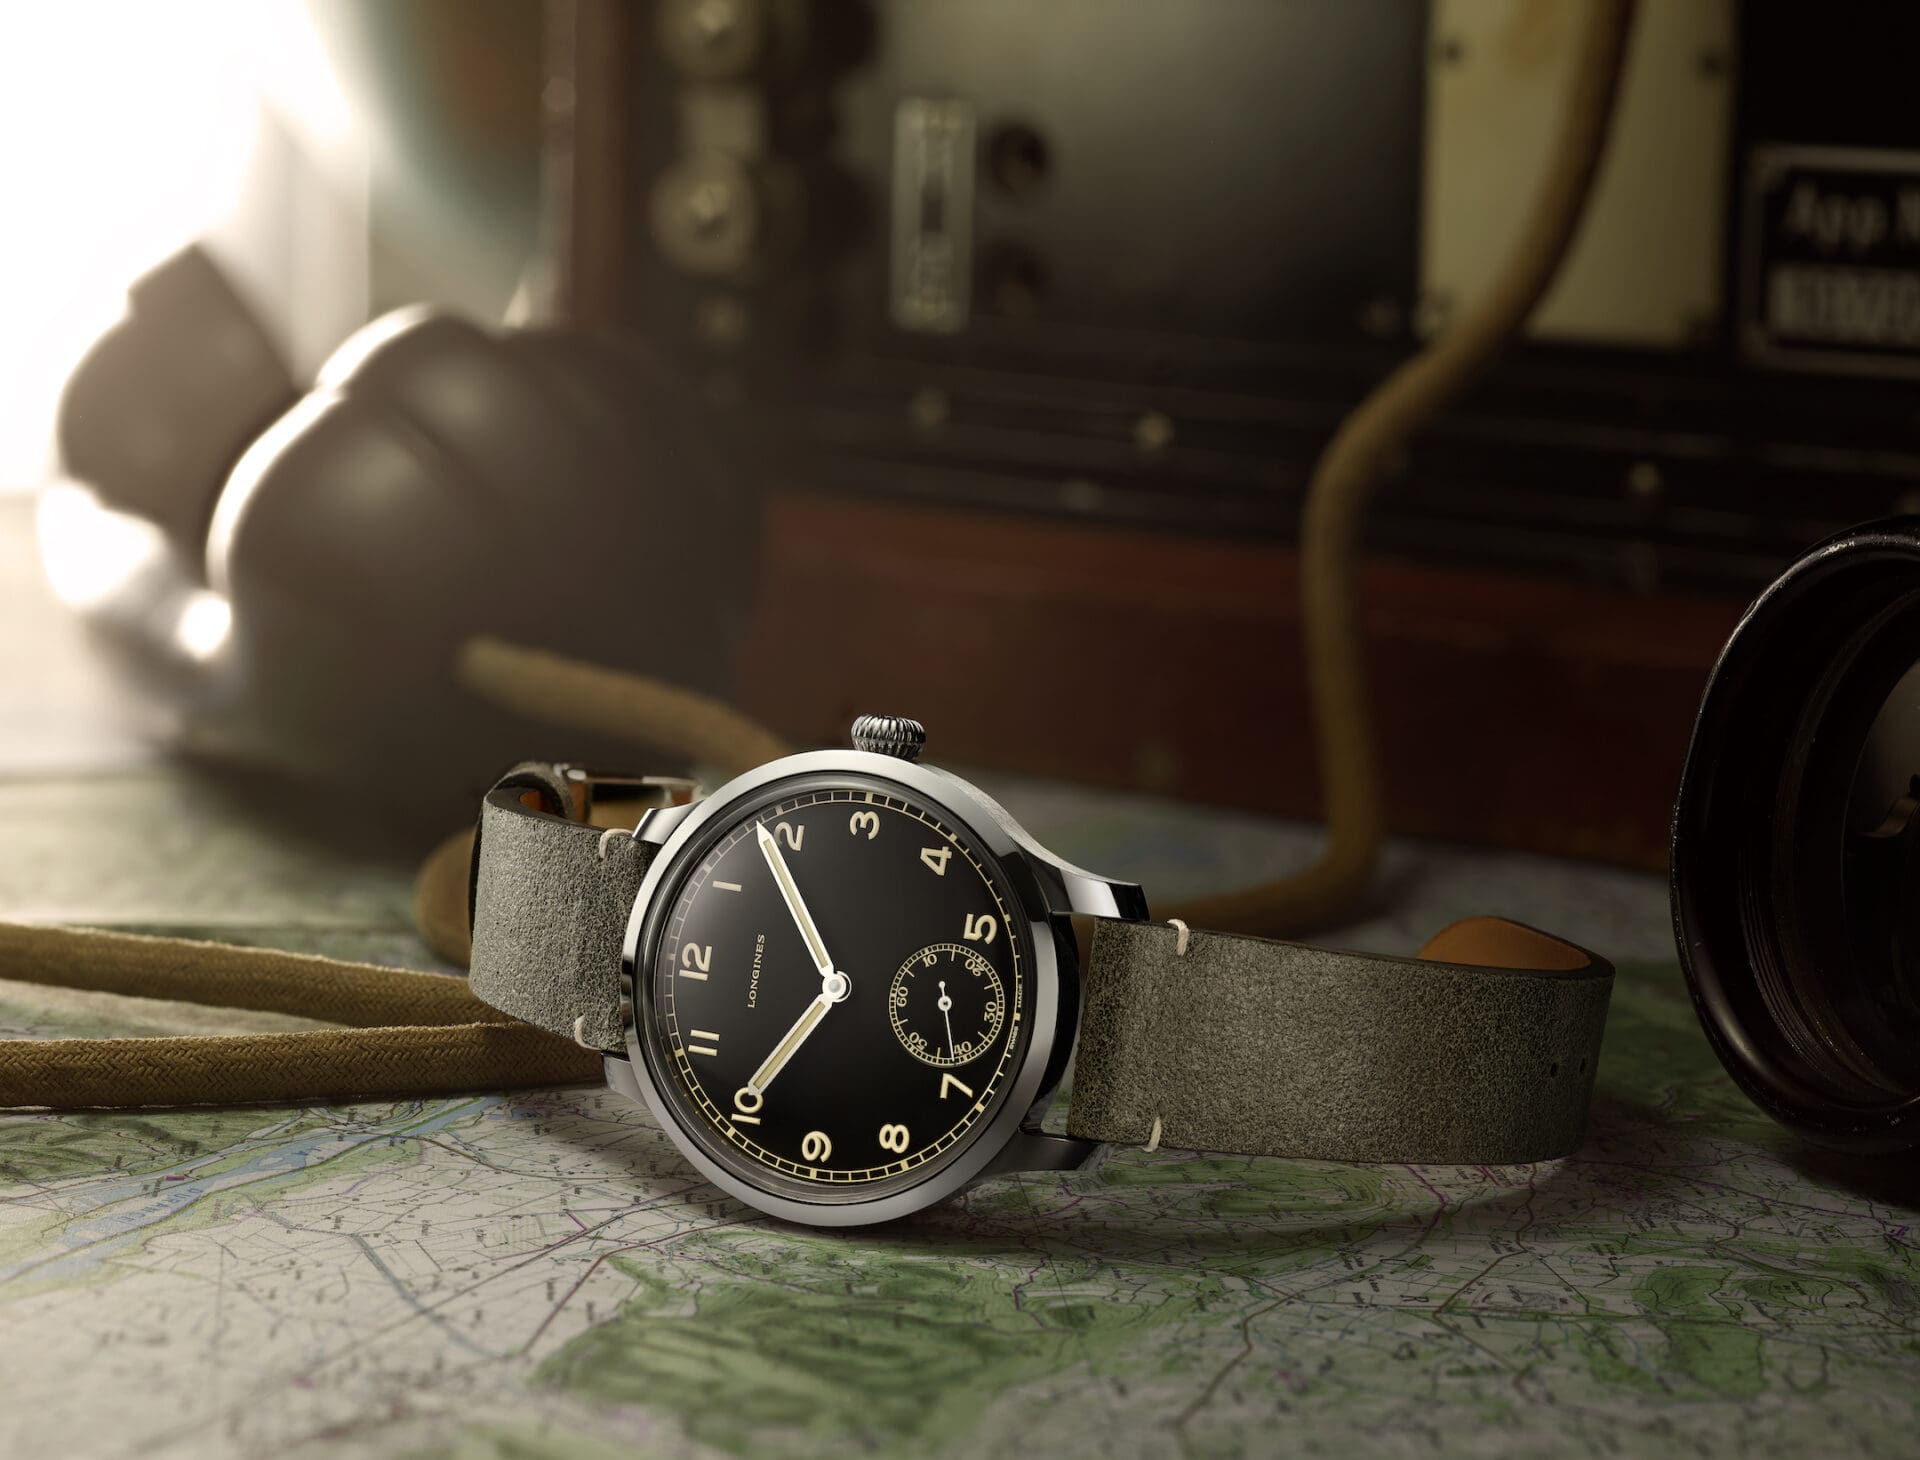 INTRODUCING: The Longines Heritage Military 1938